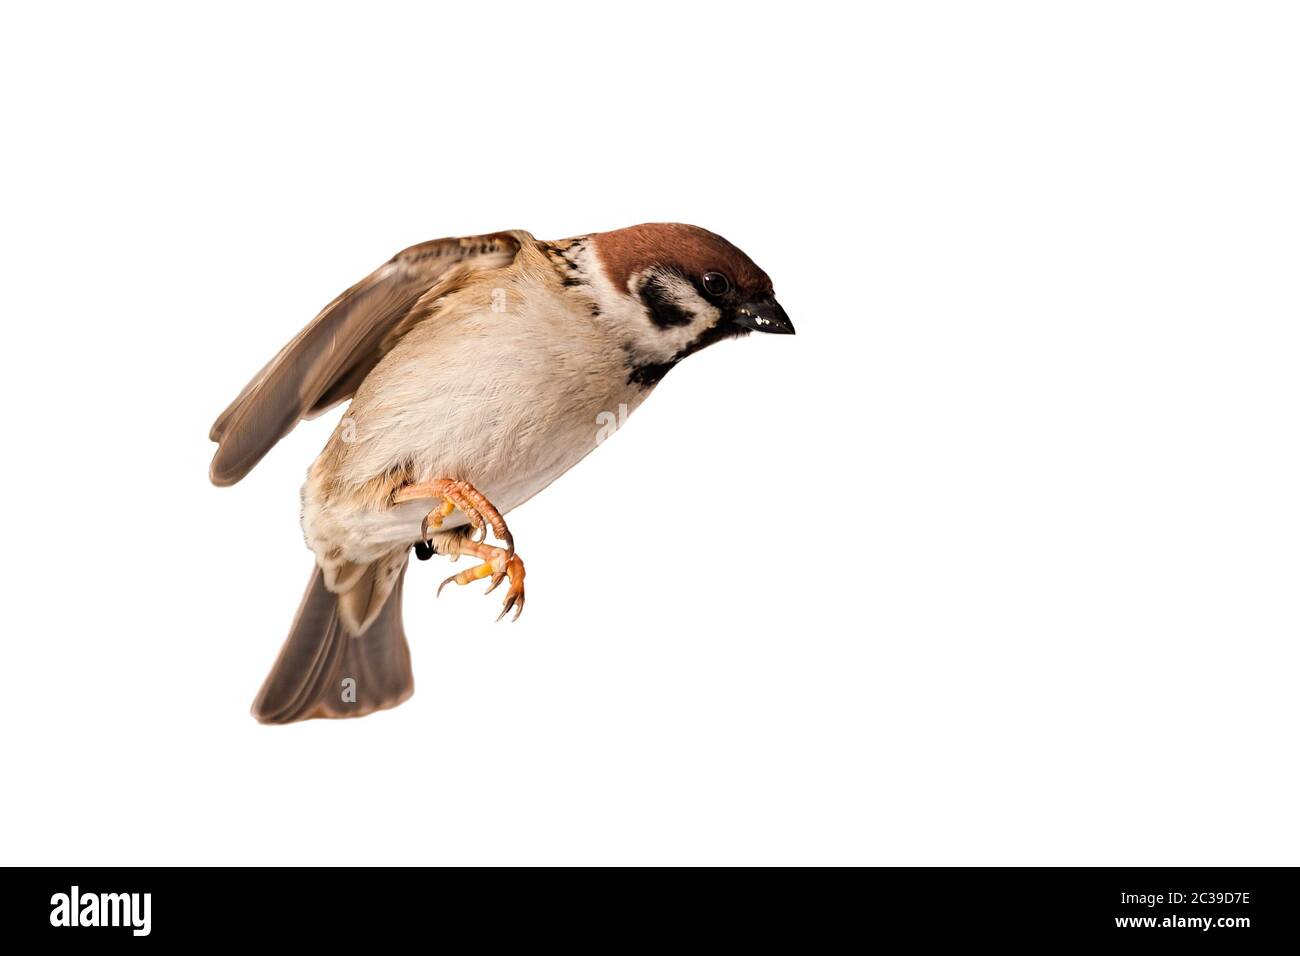 Eurasian tree sparrow, passer montanus, landing with wings open isolated on white background. Small bird with brown plumage flying in garden on countr Stock Photo